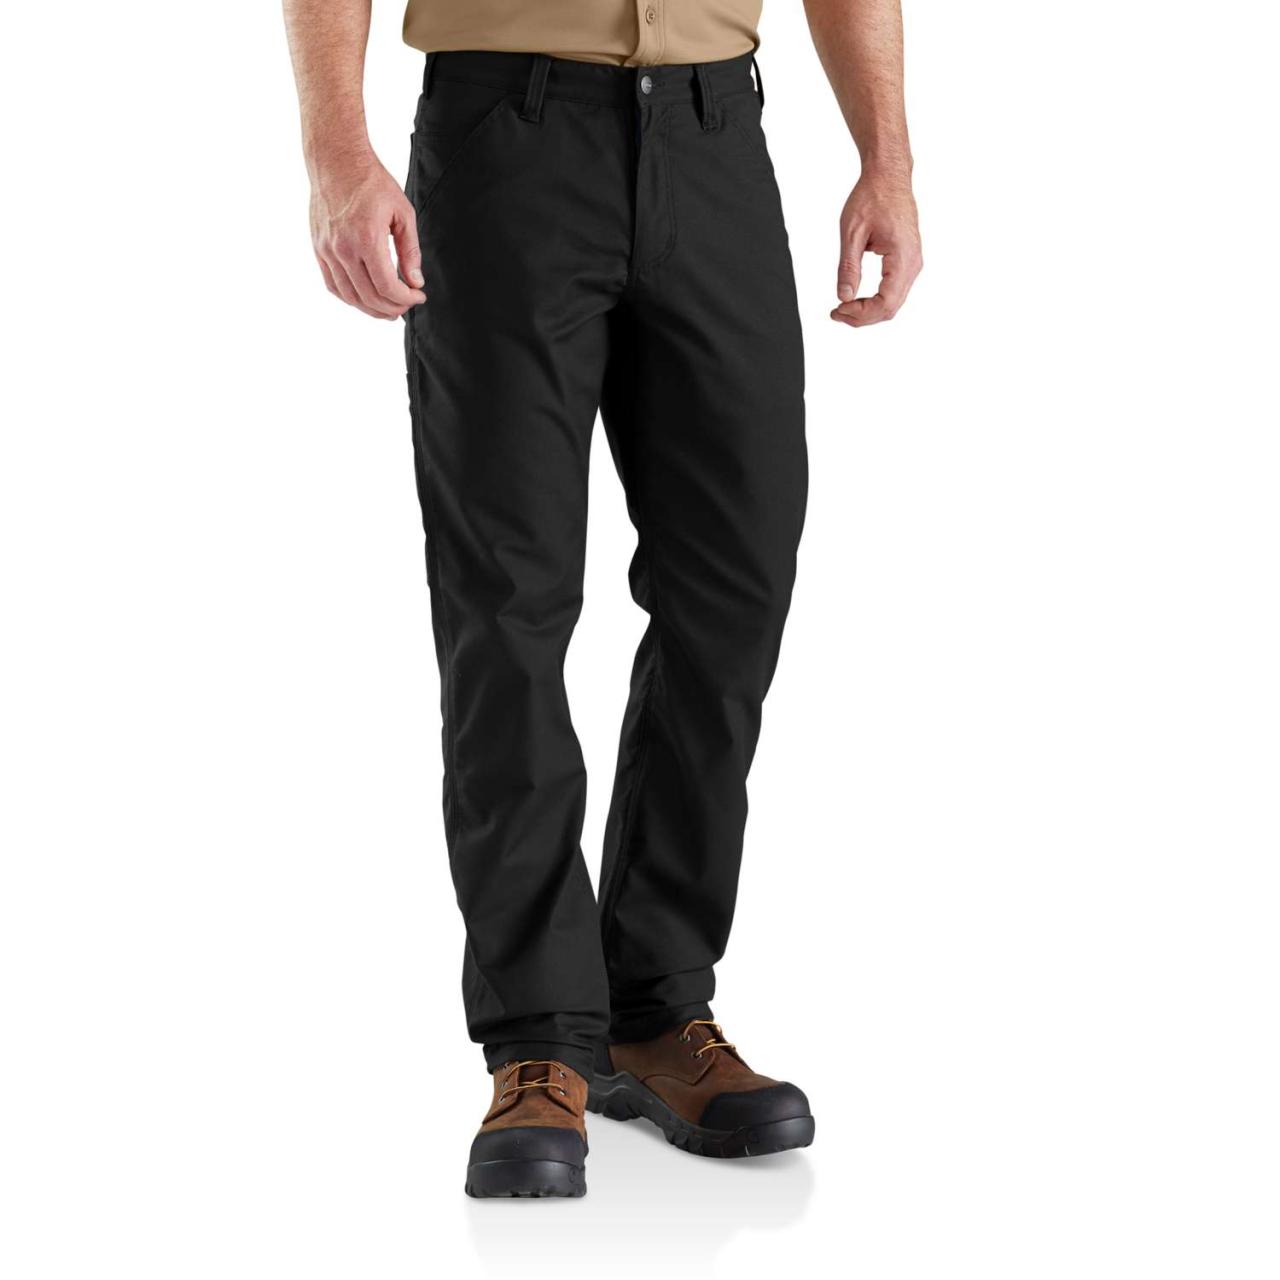 Ridgecut Men's Straight Fit Mid-Rise Canvas Work Pants at Tractor Supply  Co. | Mens work pants, Work pants, Canvas work pants